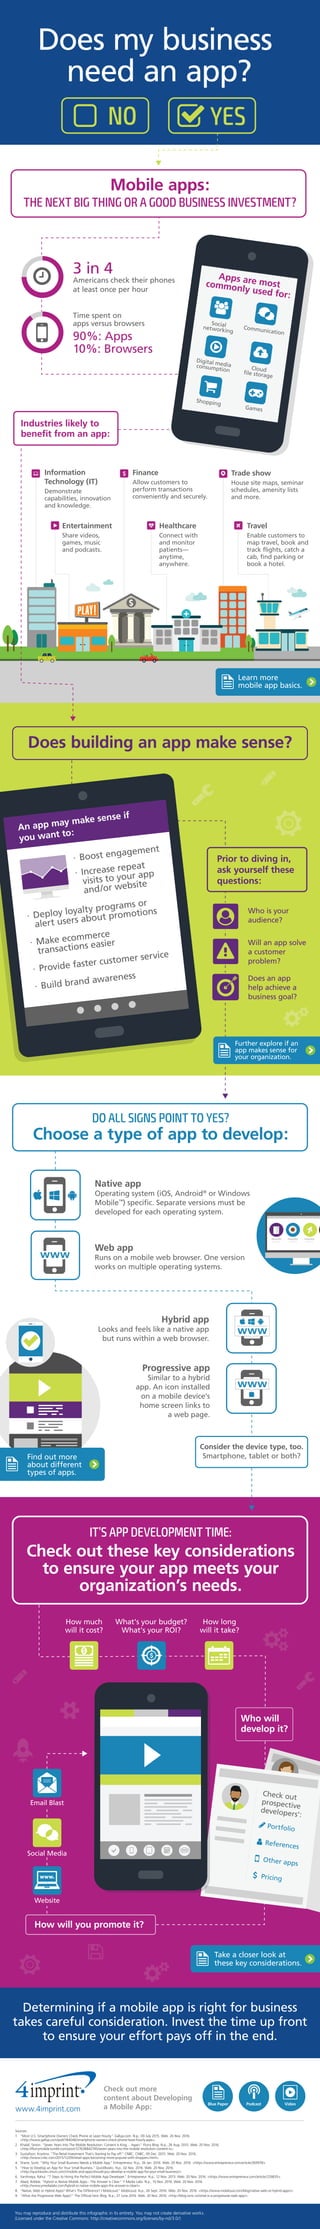 You may reproduce and distribute this infographic in its entirety. You may not create derivative works.
(Licensed under the Creative Commons: http://creativecommons.org/licenses/by-nd/3.0/)
Sources:
1. “Most U.S. Smartphone Owners Check Phone at Least Hourly.” Gallup.com. N.p., 09 July 2015. Web. 20 Nov. 2016.
<http://www.gallup.com/poll/184046/smartphone-owners-check-phone-least-hourly.aspx>.
2. Khalaf, Simon. “Seven Years Into The Mobile Revolution: Content Is King… Again.” Flurry Blog. N.p., 26 Aug. 2015. Web. 20 Nov. 2016.
<http://flurrymobile.tumblr.com/post/127638842745/seven-years-into-the-mobile-revolution-content-is>.
3. Gustafson, Krystina. “The Retail Investment That's Starting to Pay off.” CNBC. CNBC, 09 Dec. 2015. Web. 20 Nov. 2016.
<http://www.cnbc.com/2015/12/09/retail-apps-becoming-more-popular-with-shoppers.html>.
4. Shane, Scott. “Why Your Small Business Needs a Mobile App.” Entrepreneur. N.p., 26 Jan. 2016. Web. 20 Nov. 2016. <https://www.entrepreneur.com/article/269978>.
5. “How to Develop an App for Your Small Business.” QuickBooks. N.p., 02 Nov. 2016. Web. 20 Nov. 2016.
<http://quickbooks.intuit.com/r/mobile-and-apps/should-you-develop-a-mobile-app-for-your-small-business/>.
6. Varshneya, Rahul. “7 Steps to Hiring the Perfect Mobile App Developer.” Entrepreneur. N.p., 12 Nov. 2013. Web. 20 Nov. 2016. <https://www.entrepreneur.com/article/229835>.
7. Abed, Robbie. “Hybrid vs Native Mobile Apps - The Answer Is Clear.” Y Media Labs. N.p., 10 Nov. 2016. Web. 20 Nov. 2016.
<http://www.ymedialabs.com/hybrid-vs-native-mobile-apps-the-answer-is-clear/>.
8. “Native, Web or Hybrid Apps? What’s The Difference? | MobiLoud.” MobiLoud. N.p., 26 Sept. 2016. Web. 20 Nov. 2016. <https://www.mobiloud.com/blog/native-web-or-hybrid-apps/>.
9. “What Are Progressive Web Apps?” The Official Ionic Blog. N.p., 27 June 2016. Web. 20 Nov. 2016. <http://blog.ionic.io/what-is-a-progressive-web-app/>.
www.4imprint.com
Check out more
content about Developing
a Mobile App:
PodcastBlue Paper Video
Determining if a mobile app is right for business
takes careful consideration. Invest the time up front
to ensure your effort pays off in the end.
Take a closer look at
these key considerations.
Does my business
need an app?
NO YES
Mobile apps:
THE NEXT BIG THING OR A GOOD BUSINESS INVESTMENT?
Does building an app make sense?
DO ALL SIGNS POINT TO YES?
Choose a type of app to develop:
IT’S APP DEVELOPMENT TIME:
Check out these key considerations
to ensure your app meets your
organization’s needs.
Learn more
mobile app basics.
3 in 4
Americans check their phones
at least once per hour
Time spent on
apps versus browsers
90%: Apps
10%: Browsers
Information
Technology (IT)
Demonstrate
capabilities, innovation
and knowledge.
Healthcare
Connect with
and monitor
patients—
anytime,
anywhere.
Finance
Allow customers to
perform transactions
conveniently and securely.
Entertainment
Share videos,
games, music
and podcasts.
Travel
Enable customers to
map travel, book and
track flights, catch a
cab, find parking or
book a hotel.
Trade show
House site maps, seminar
schedules, amenity lists
and more.
Apps are mostcommonly used for:
Socialnetworking
Communication
Digital mediaconsumption Cloudfile storage
Shopping
Games
○
Prior to diving in,
ask yourself these
questions:
Who is your
audience?
Will an app solve
a customer
problem?
Does an app
help achieve a
business goal?
Native app
Operating system (iOS, Android®
or Windows
Mobile™
) specific. Separate versions must be
developed for each operating system.
Web app
Runs on a mobile web browser. One version
works on multiple operating systems.
Hybrid app
Looks and feels like a native app
but runs within a web browser.
Progressive app
Similar to a hybrid
app. An icon installed
on a mobile device’s
home screen links to
a web page.
Further explore if an
app makes sense for
your organization.
Consider the device type, too.
Smartphone, tablet or both?
Industries likely to
benefit from an app:
How will you promote it?
Check out
prospective
developers’:
Portfolio
References
Other apps
Pricing
How much
will it cost?
How long
will it take?
What's your budget?
What's your ROI?
ǽ

· Boost engagement
· Increase repeat
visits to your app
and/or website
· Deploy loyalty programs or
alert users about promotions
· Make ecommerce
transactions easier
· Provide faster customer service
· Build brand awareness
An app may make sense if
you want to:
wwwwww
Find out more
about different
types of apps.
Who will
develop it?
www
wwwwww
Website
Social Media
Email Blast
 